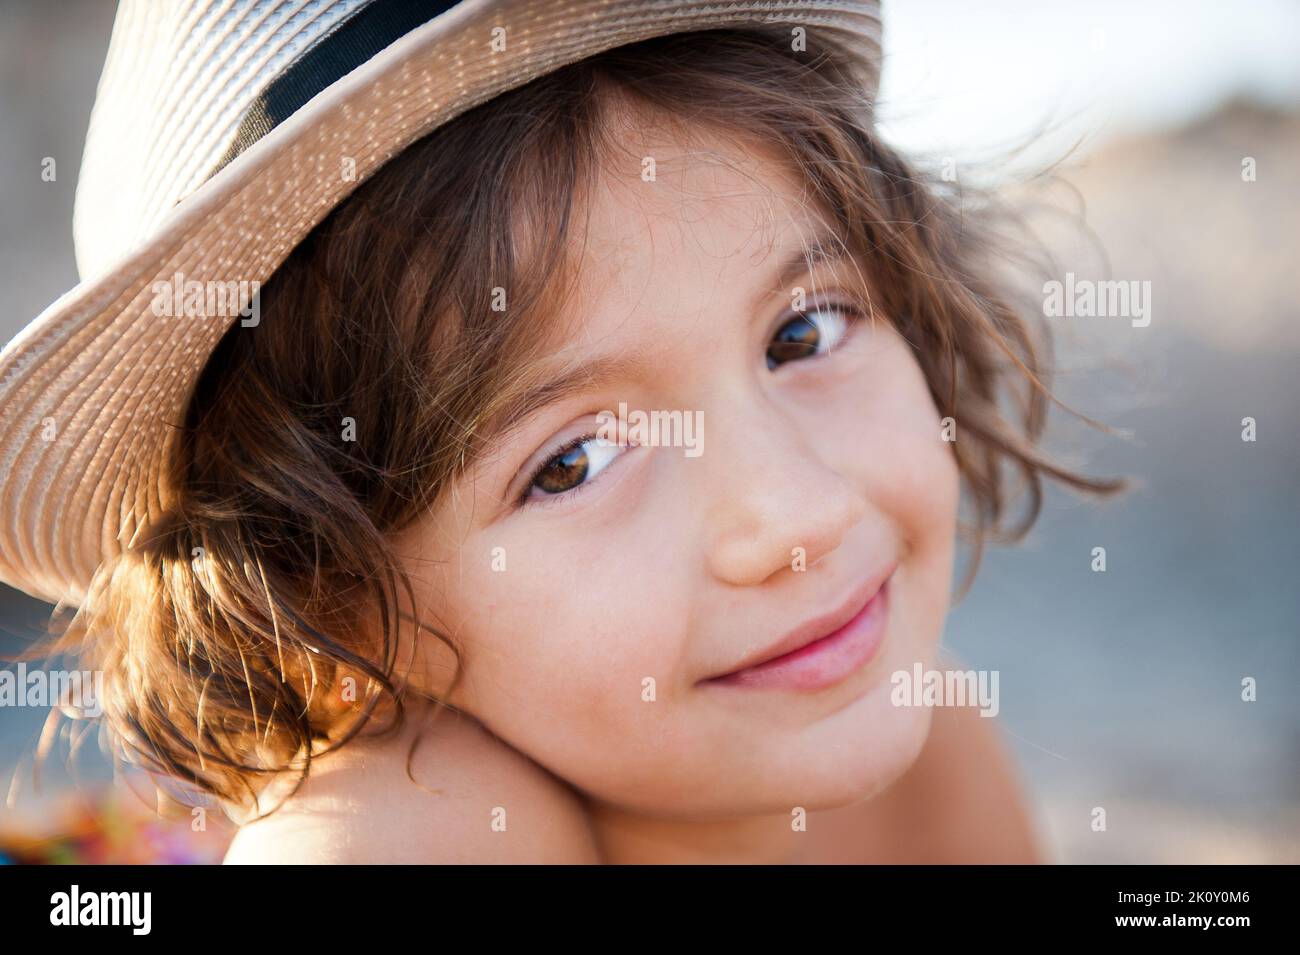 Sweet girl in a hat against nature Stock Photo